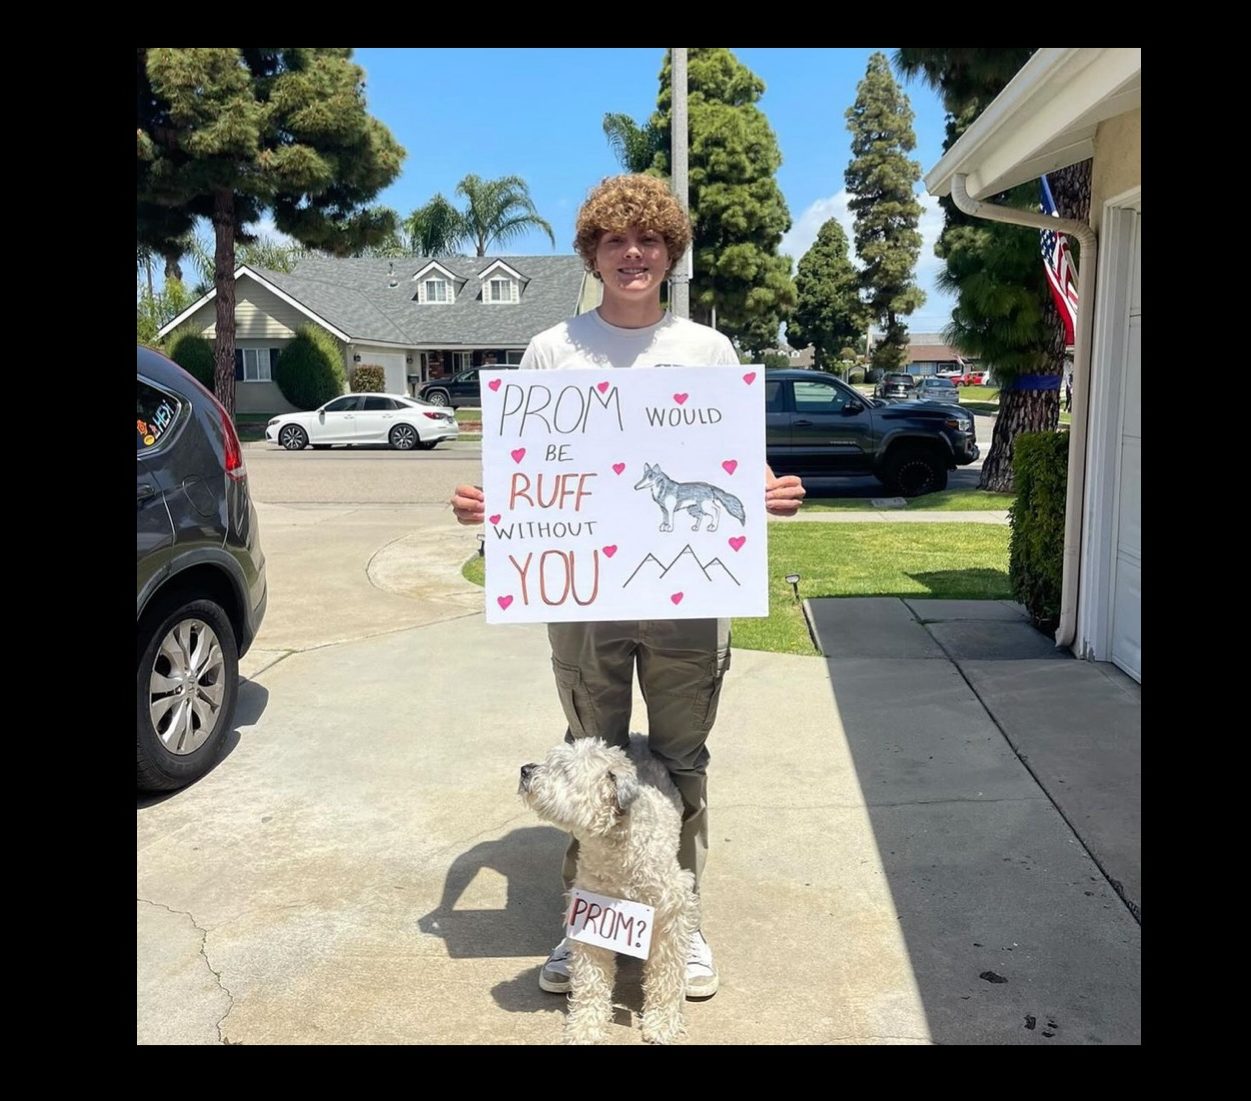 Brock Shriver and his dog promposed to Jamisen Penick in a creative and fun way.